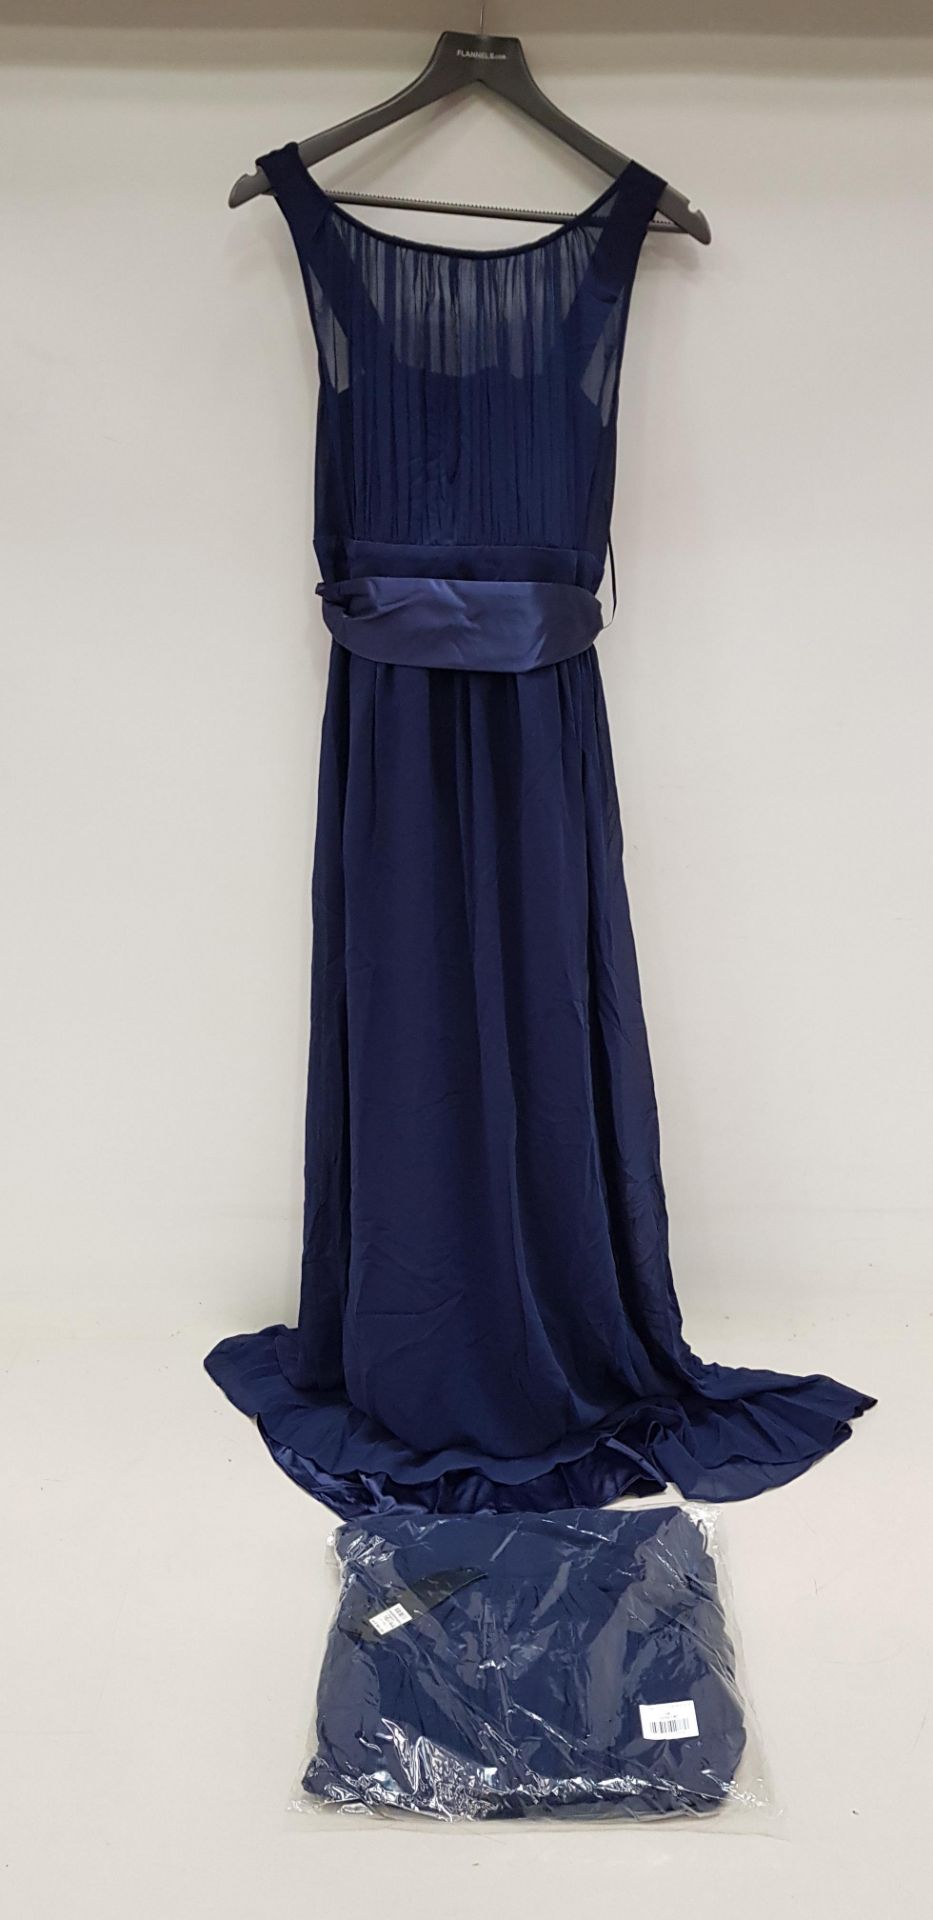 8 X BRAND NEW DOROTHY PERKINS SHOWCASE NAVY DRESSES SIZE 16 RRP £65.00 (TOTAL RRP £520.00)